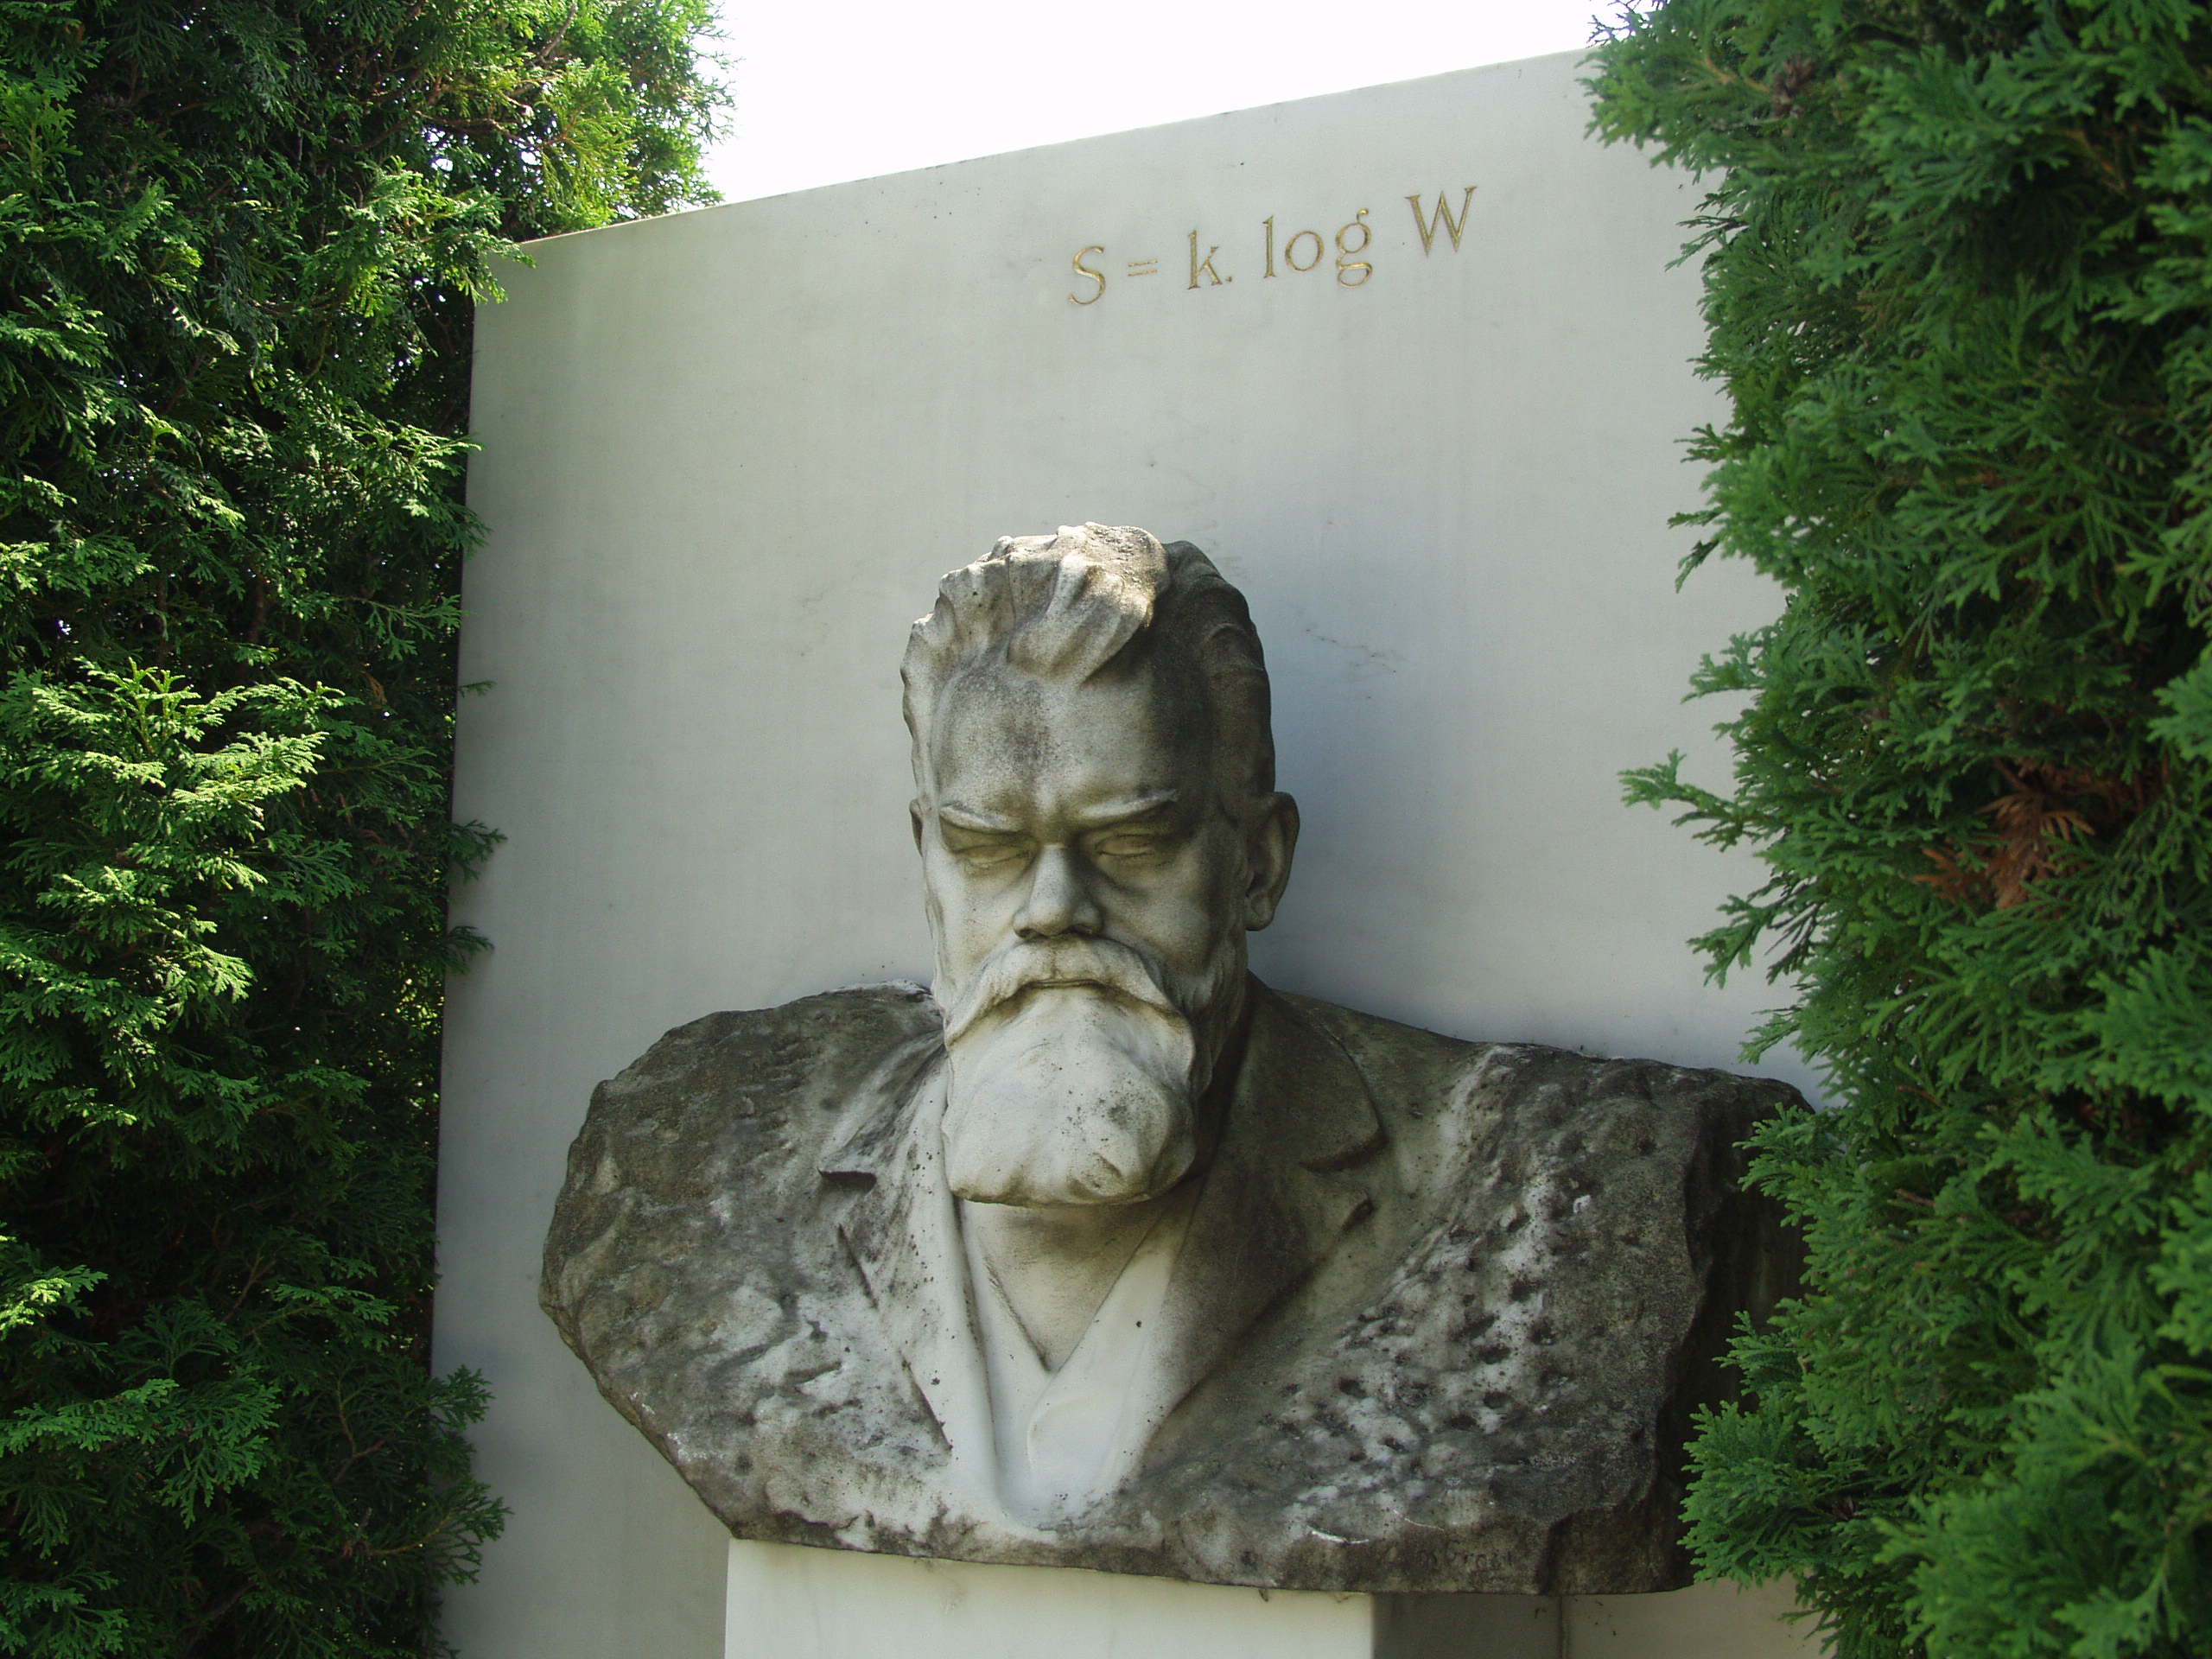 Vienna, Austria. Boltzmann's Tomb in the Zentralfriedhof (Central Cemetary). The Tomb is in Gruppe 14 C Grab No 1 (group 14 grave number 1). Photos by Tom Schneider or of him by Gerd Muller. 2002 July 14. This image: bust of Boltzmann. <a href = 